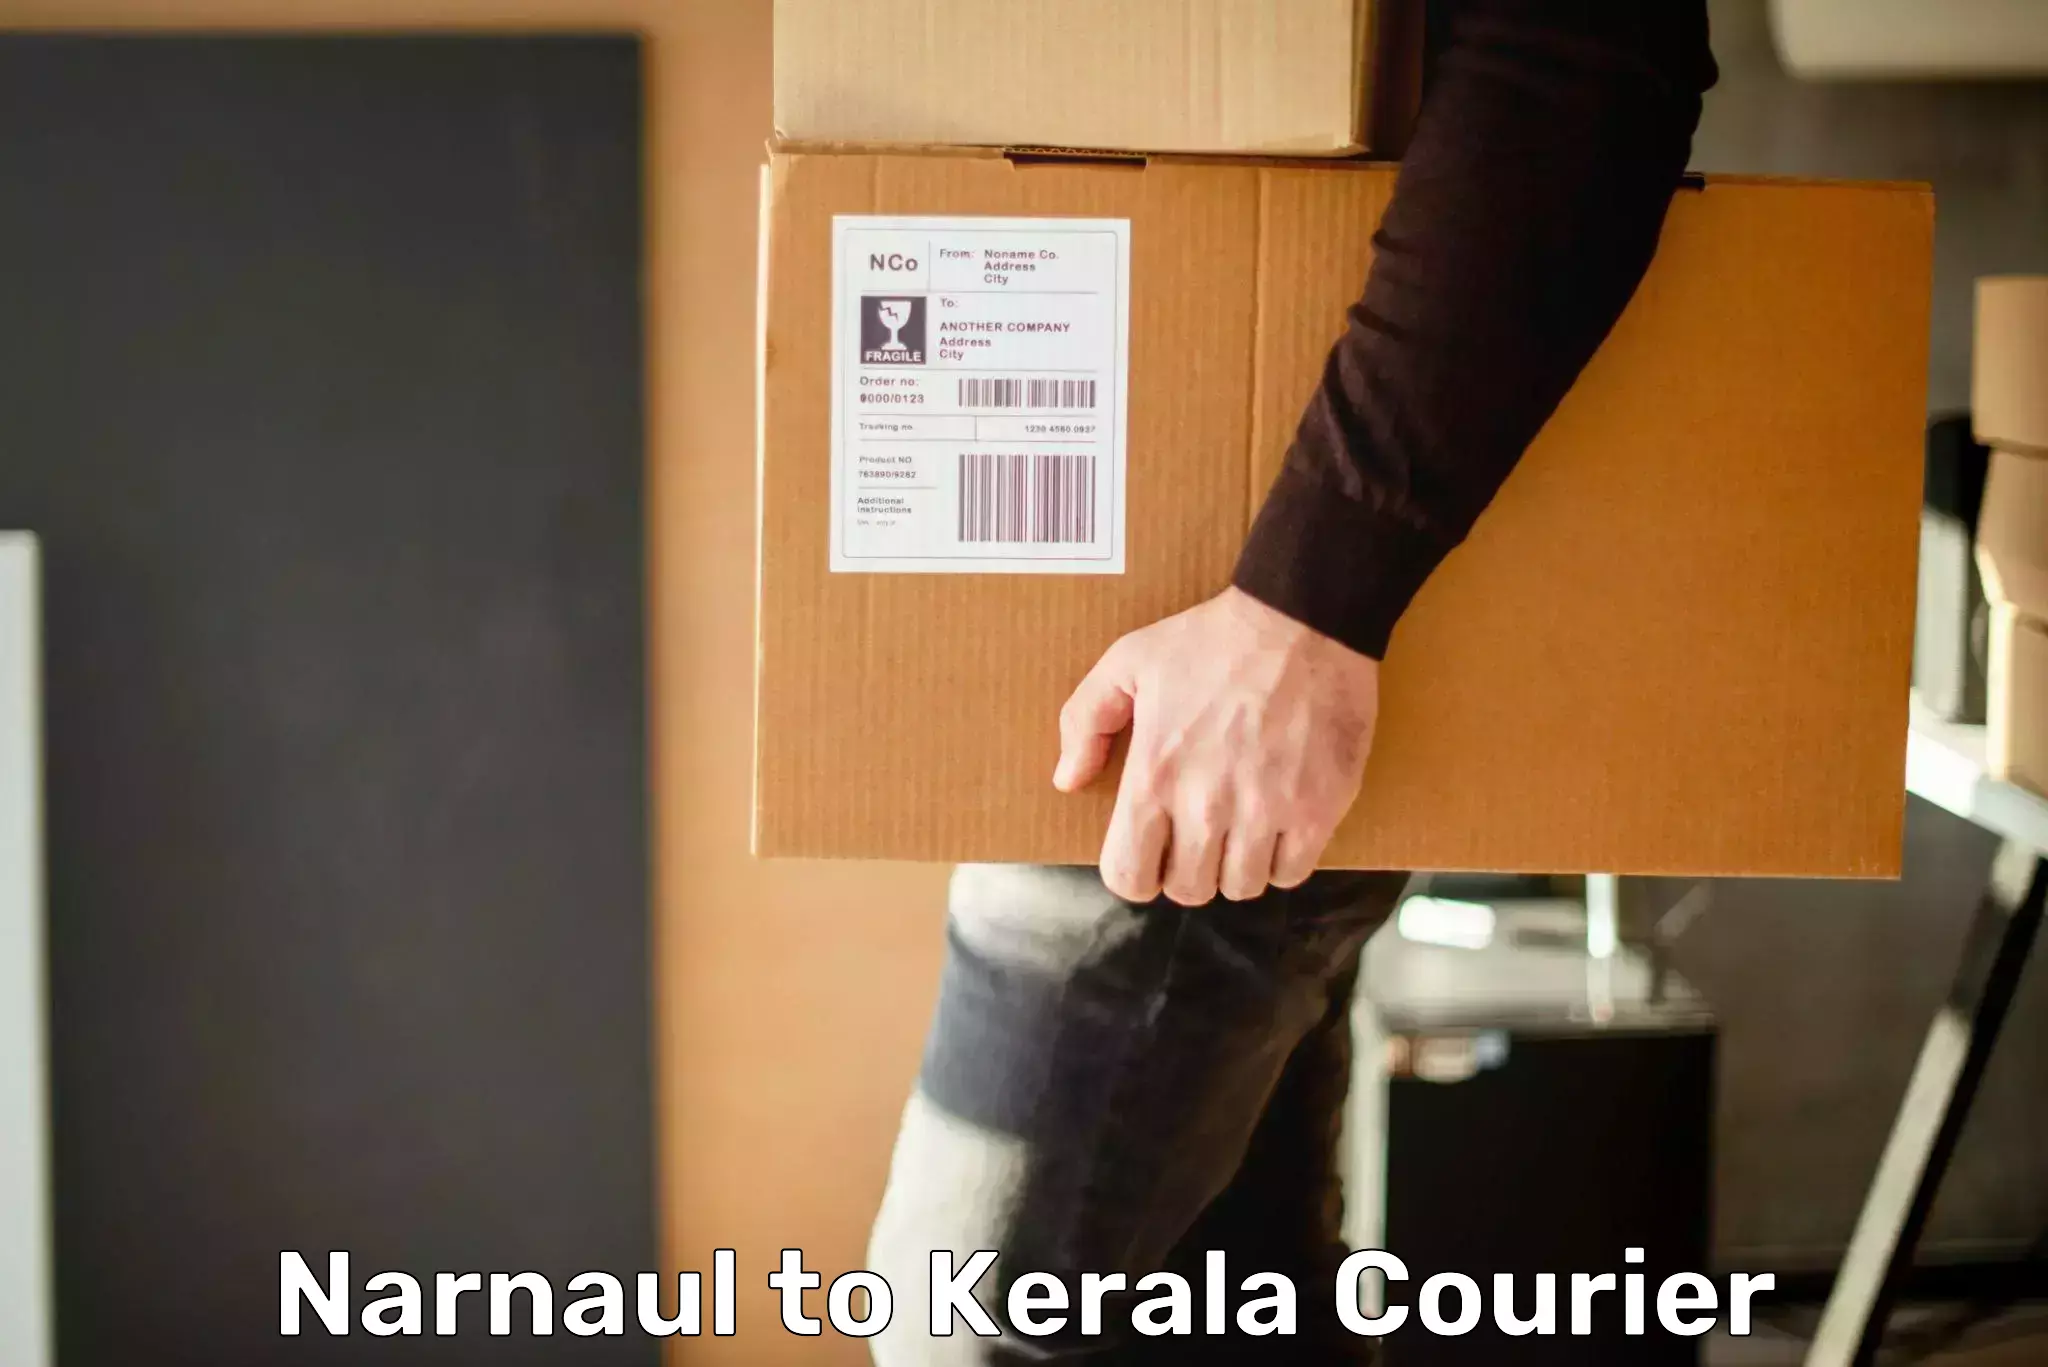 Reliable delivery network Narnaul to Kerala